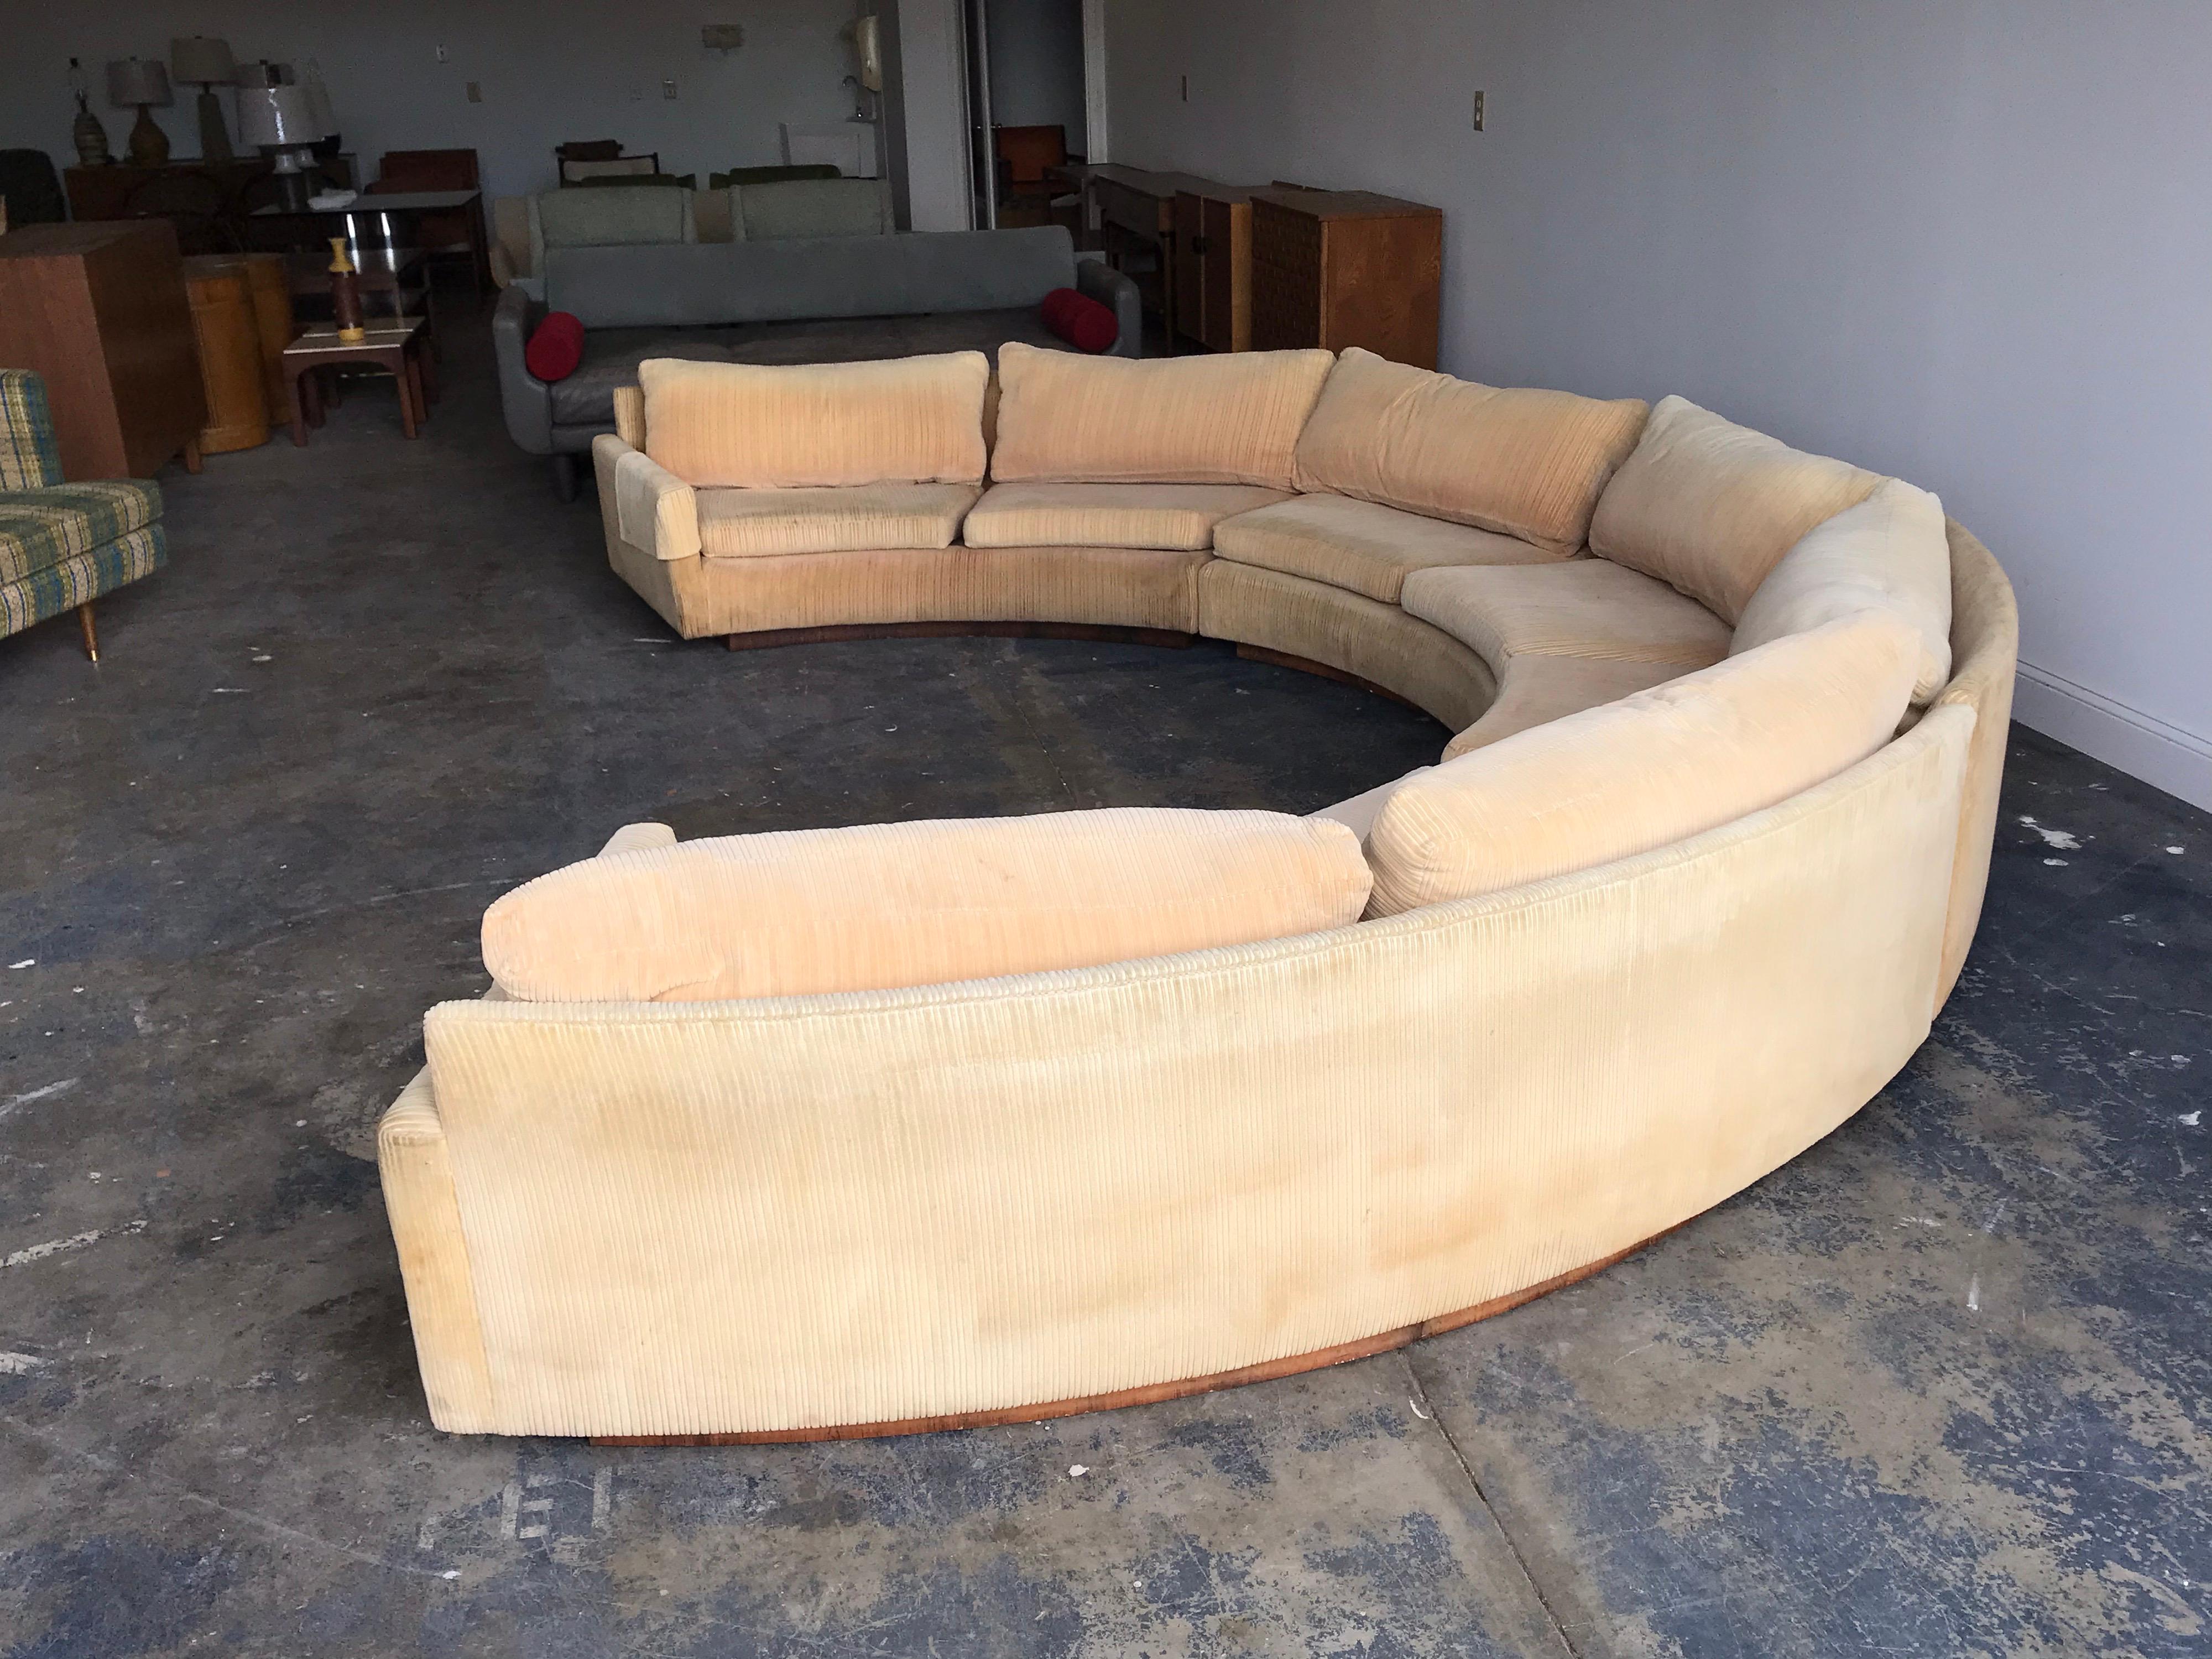 Monumental semi circular sofa by Milo Baughman. An iconic and desirable design by one of the best from the 20th century. While upholstery is free of rips or tears, there is fading and small stains. Reupholstery is recommended.


Opening from